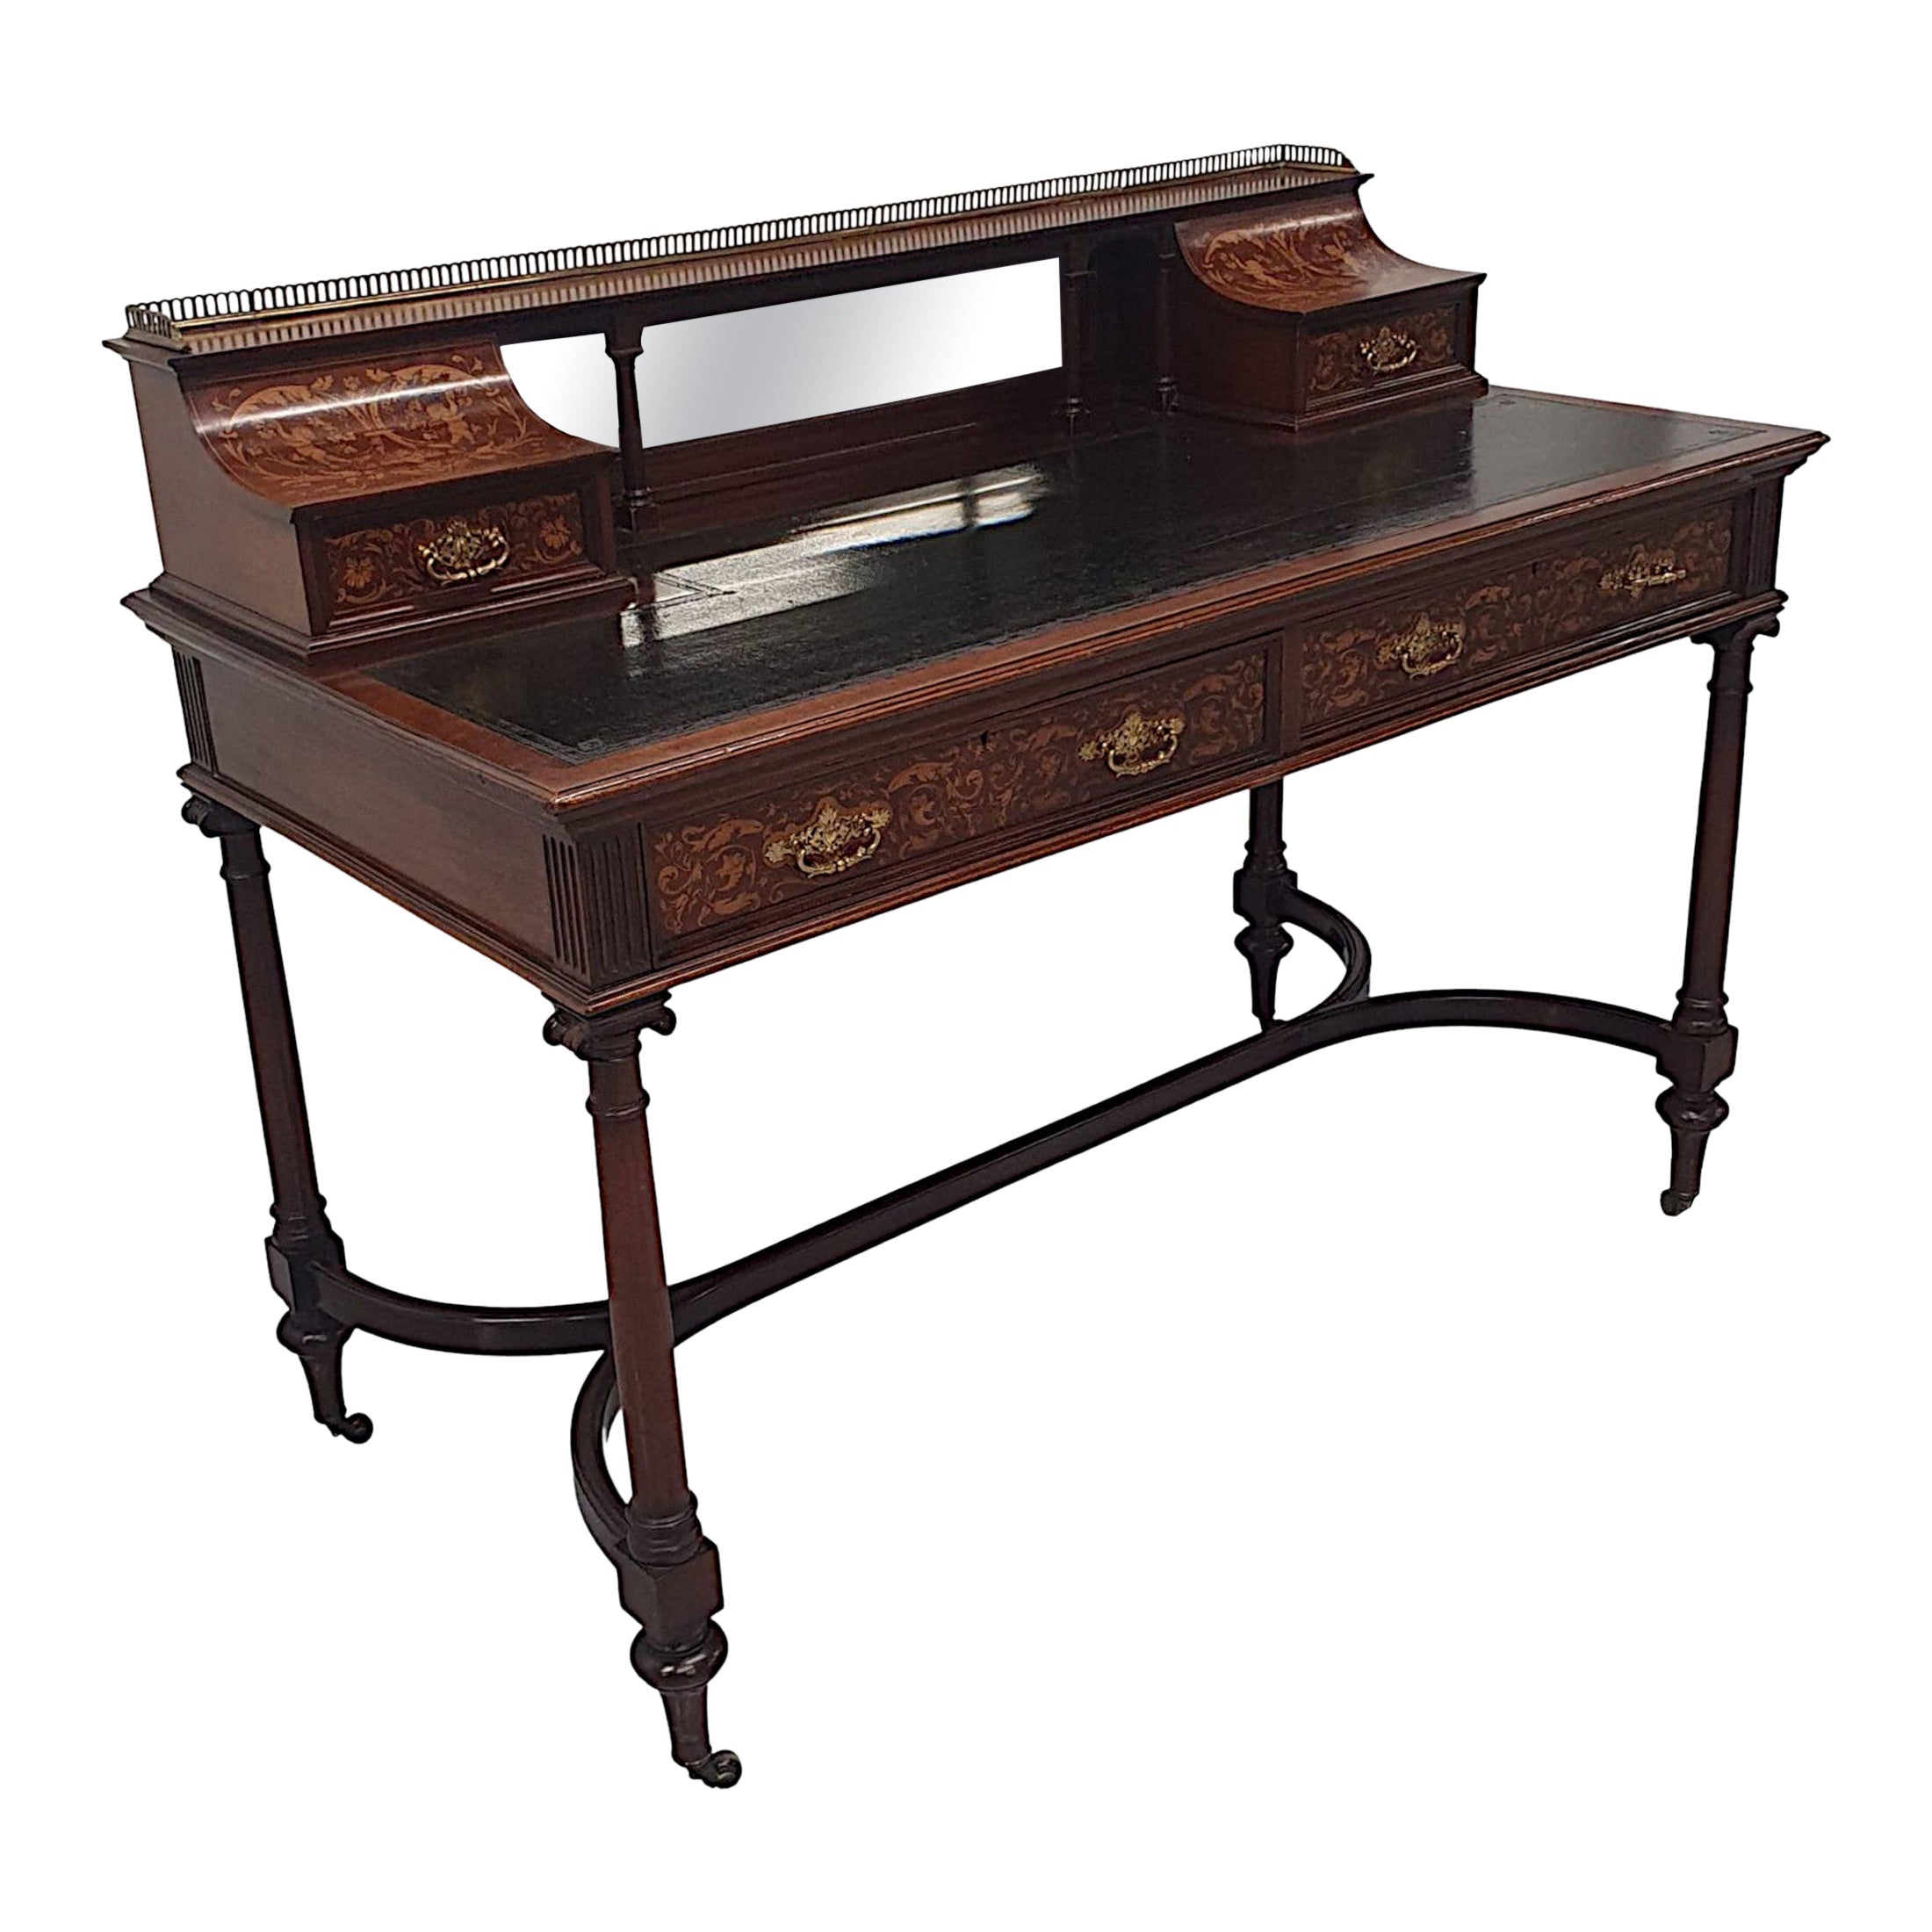 A Fabulous Edwardian Desk attributed to Edward and Roberts For Sale